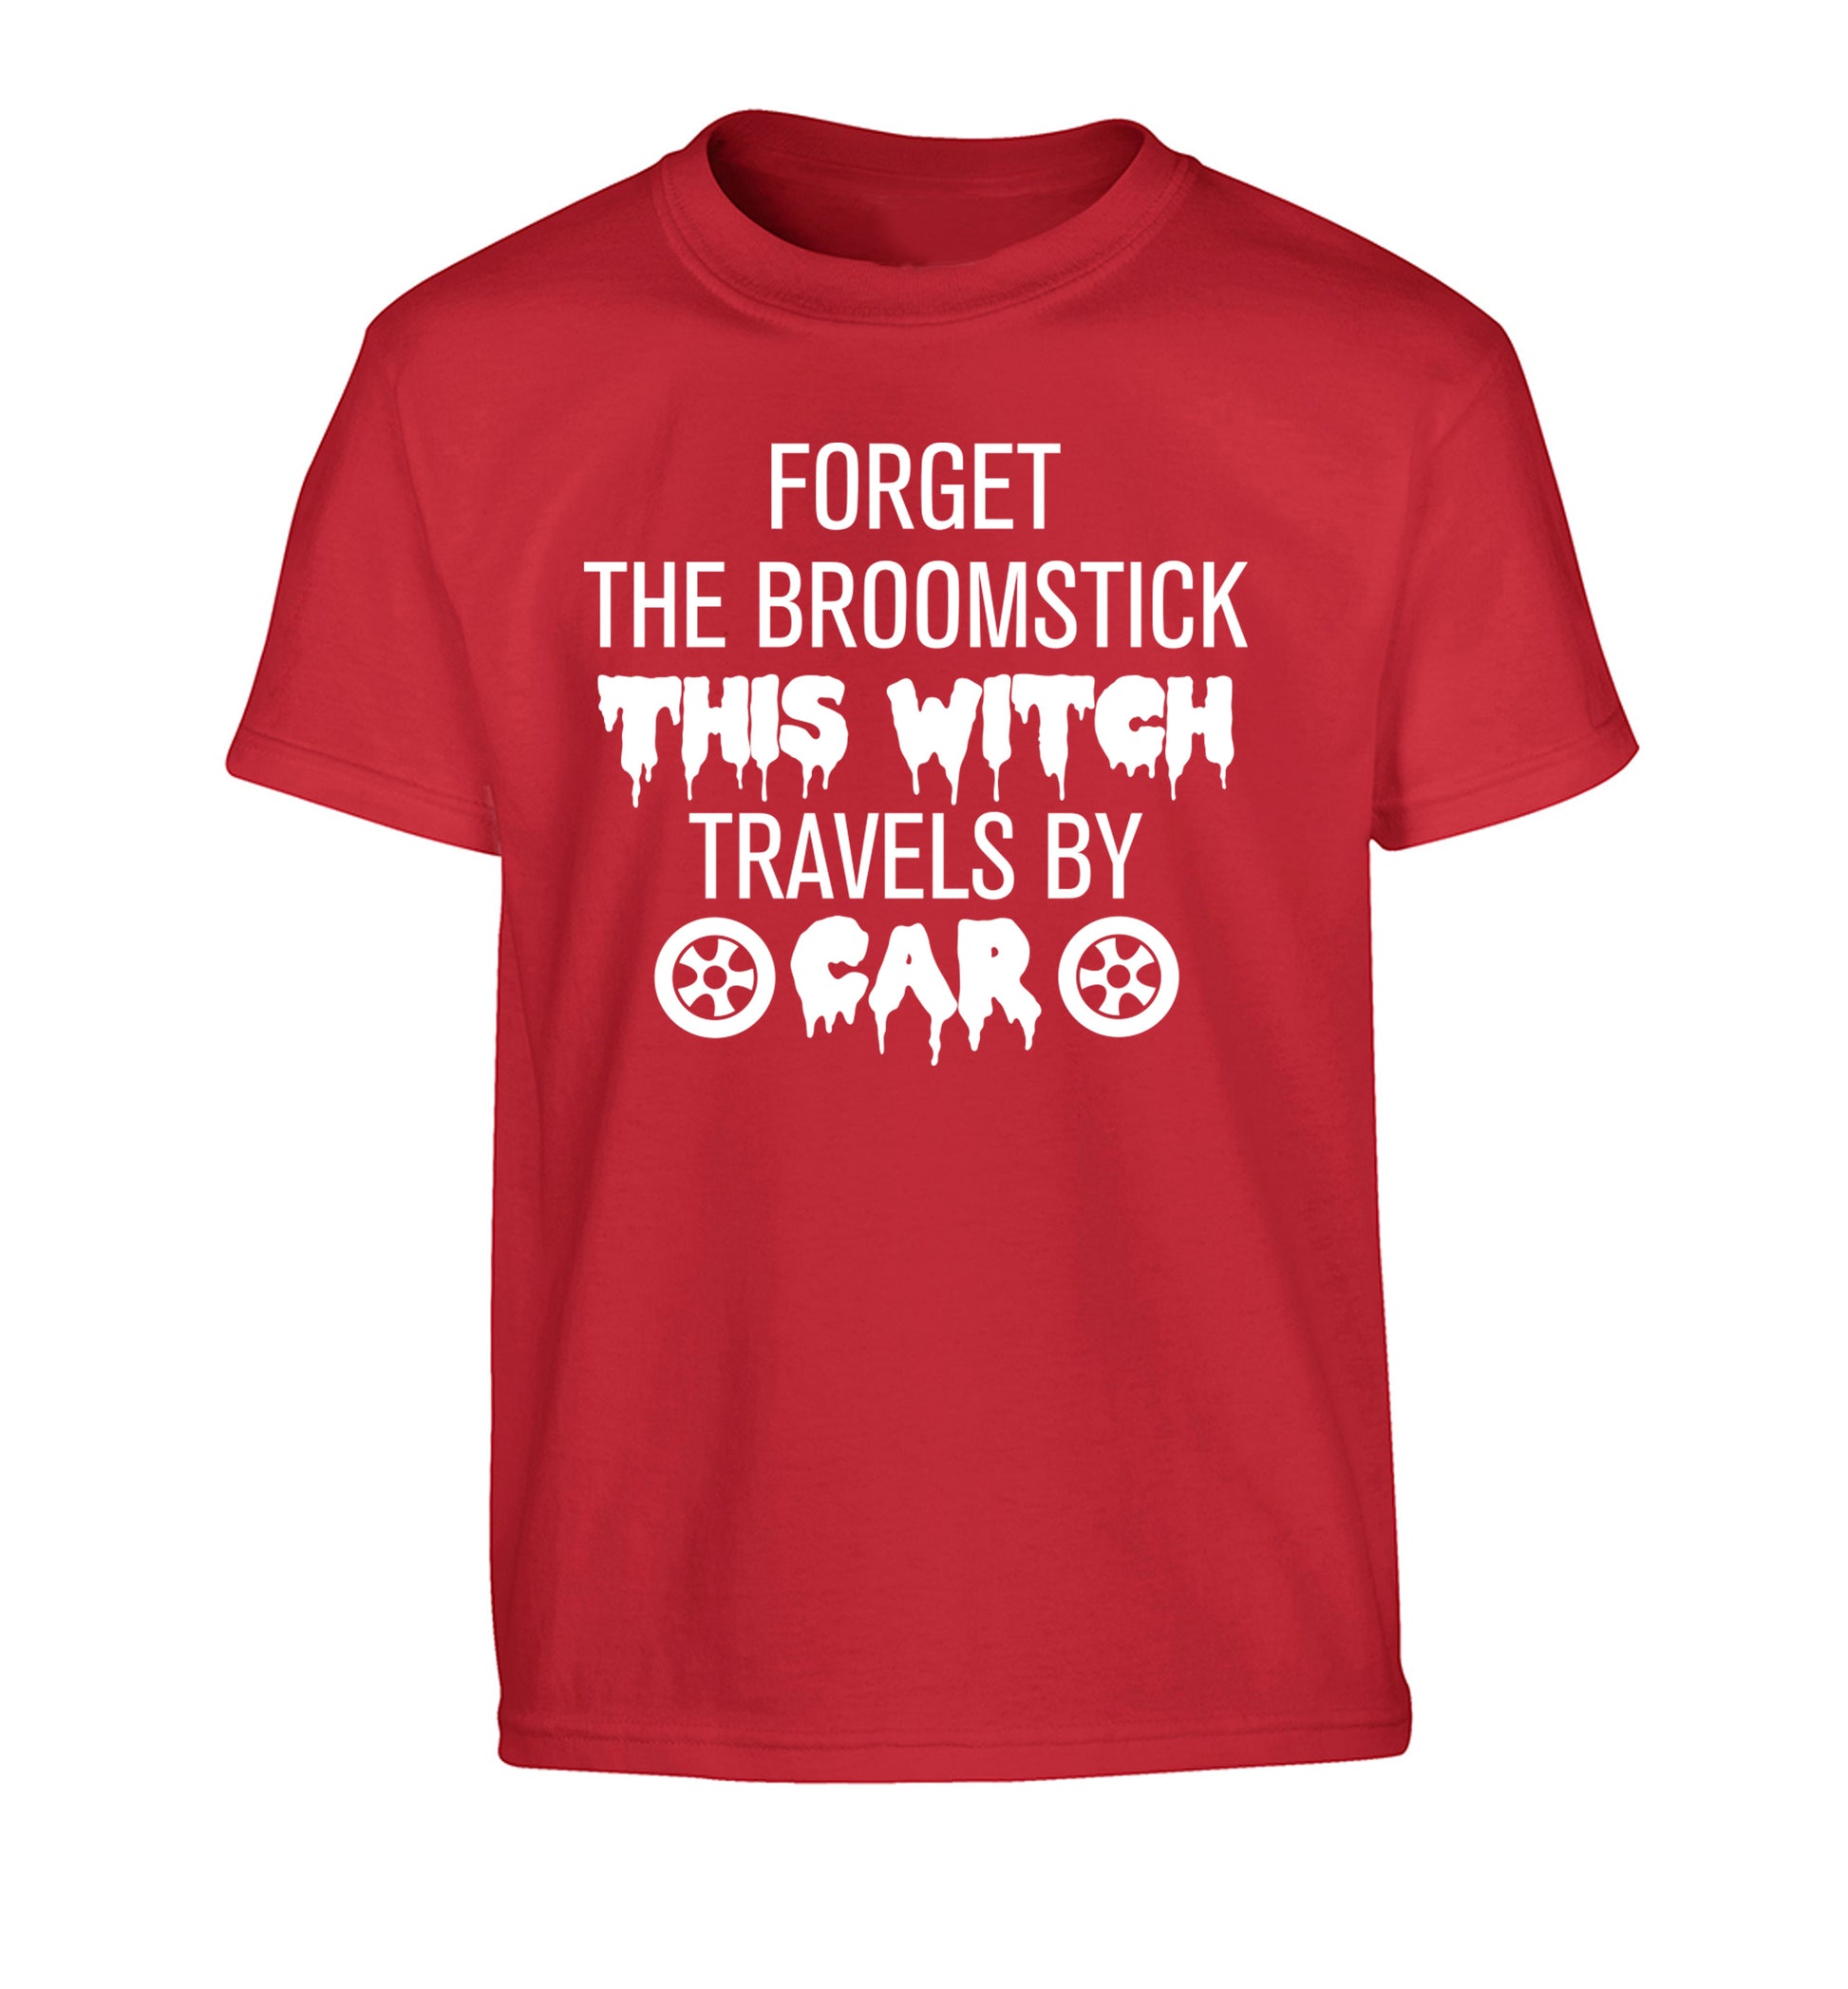 Forget the broomstick this witch travels by car Children's red Tshirt 12-14 Years